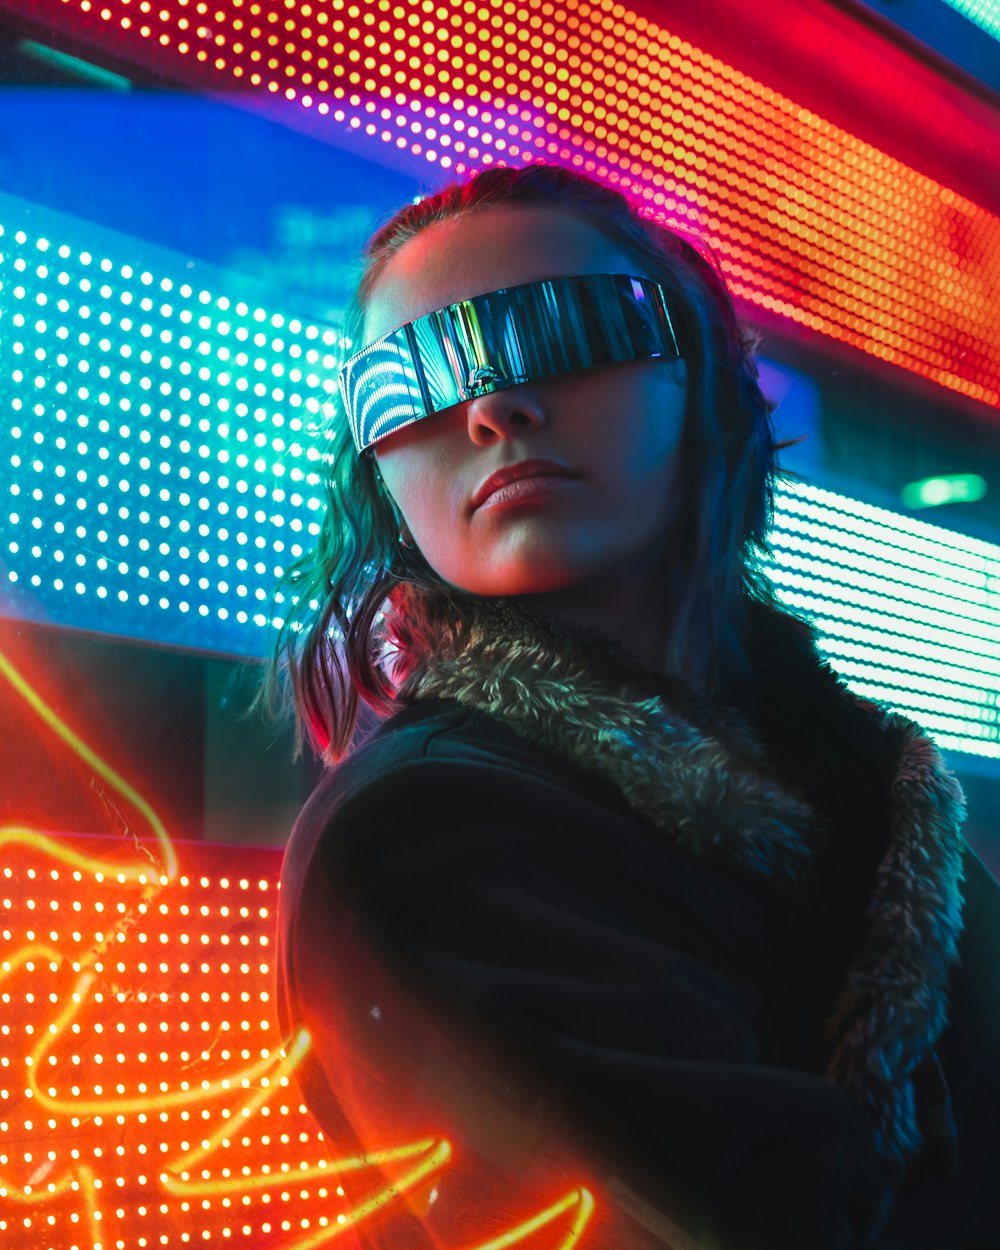 Cyberpunk Girl Pictures  Download Free Images on Unsplash